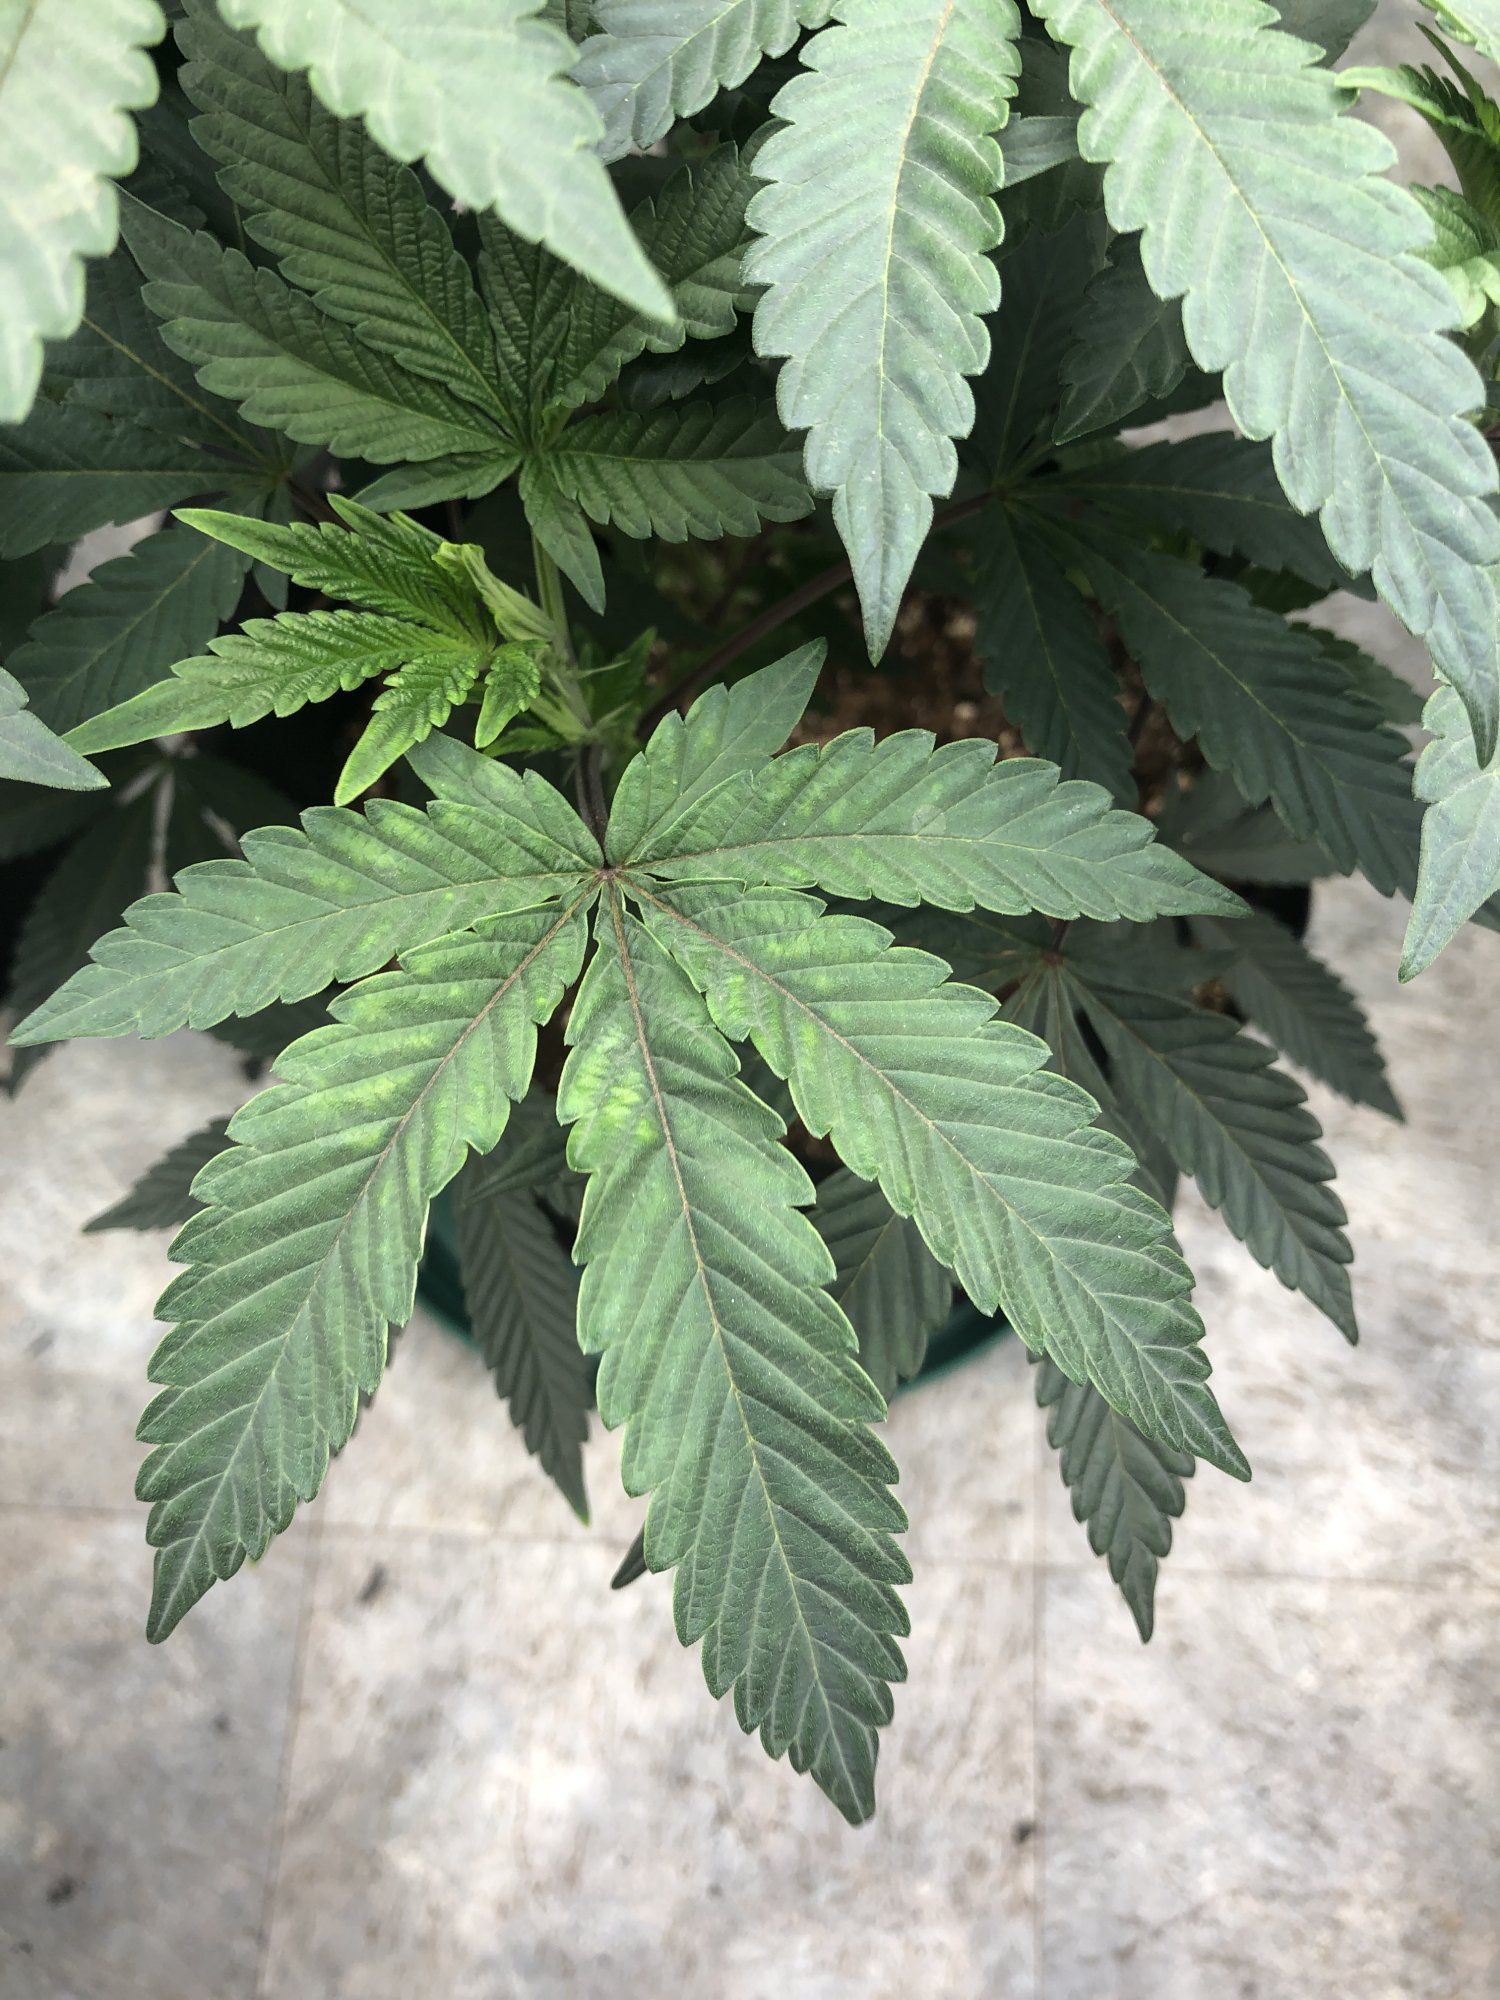 Could this be cal mag deficiency